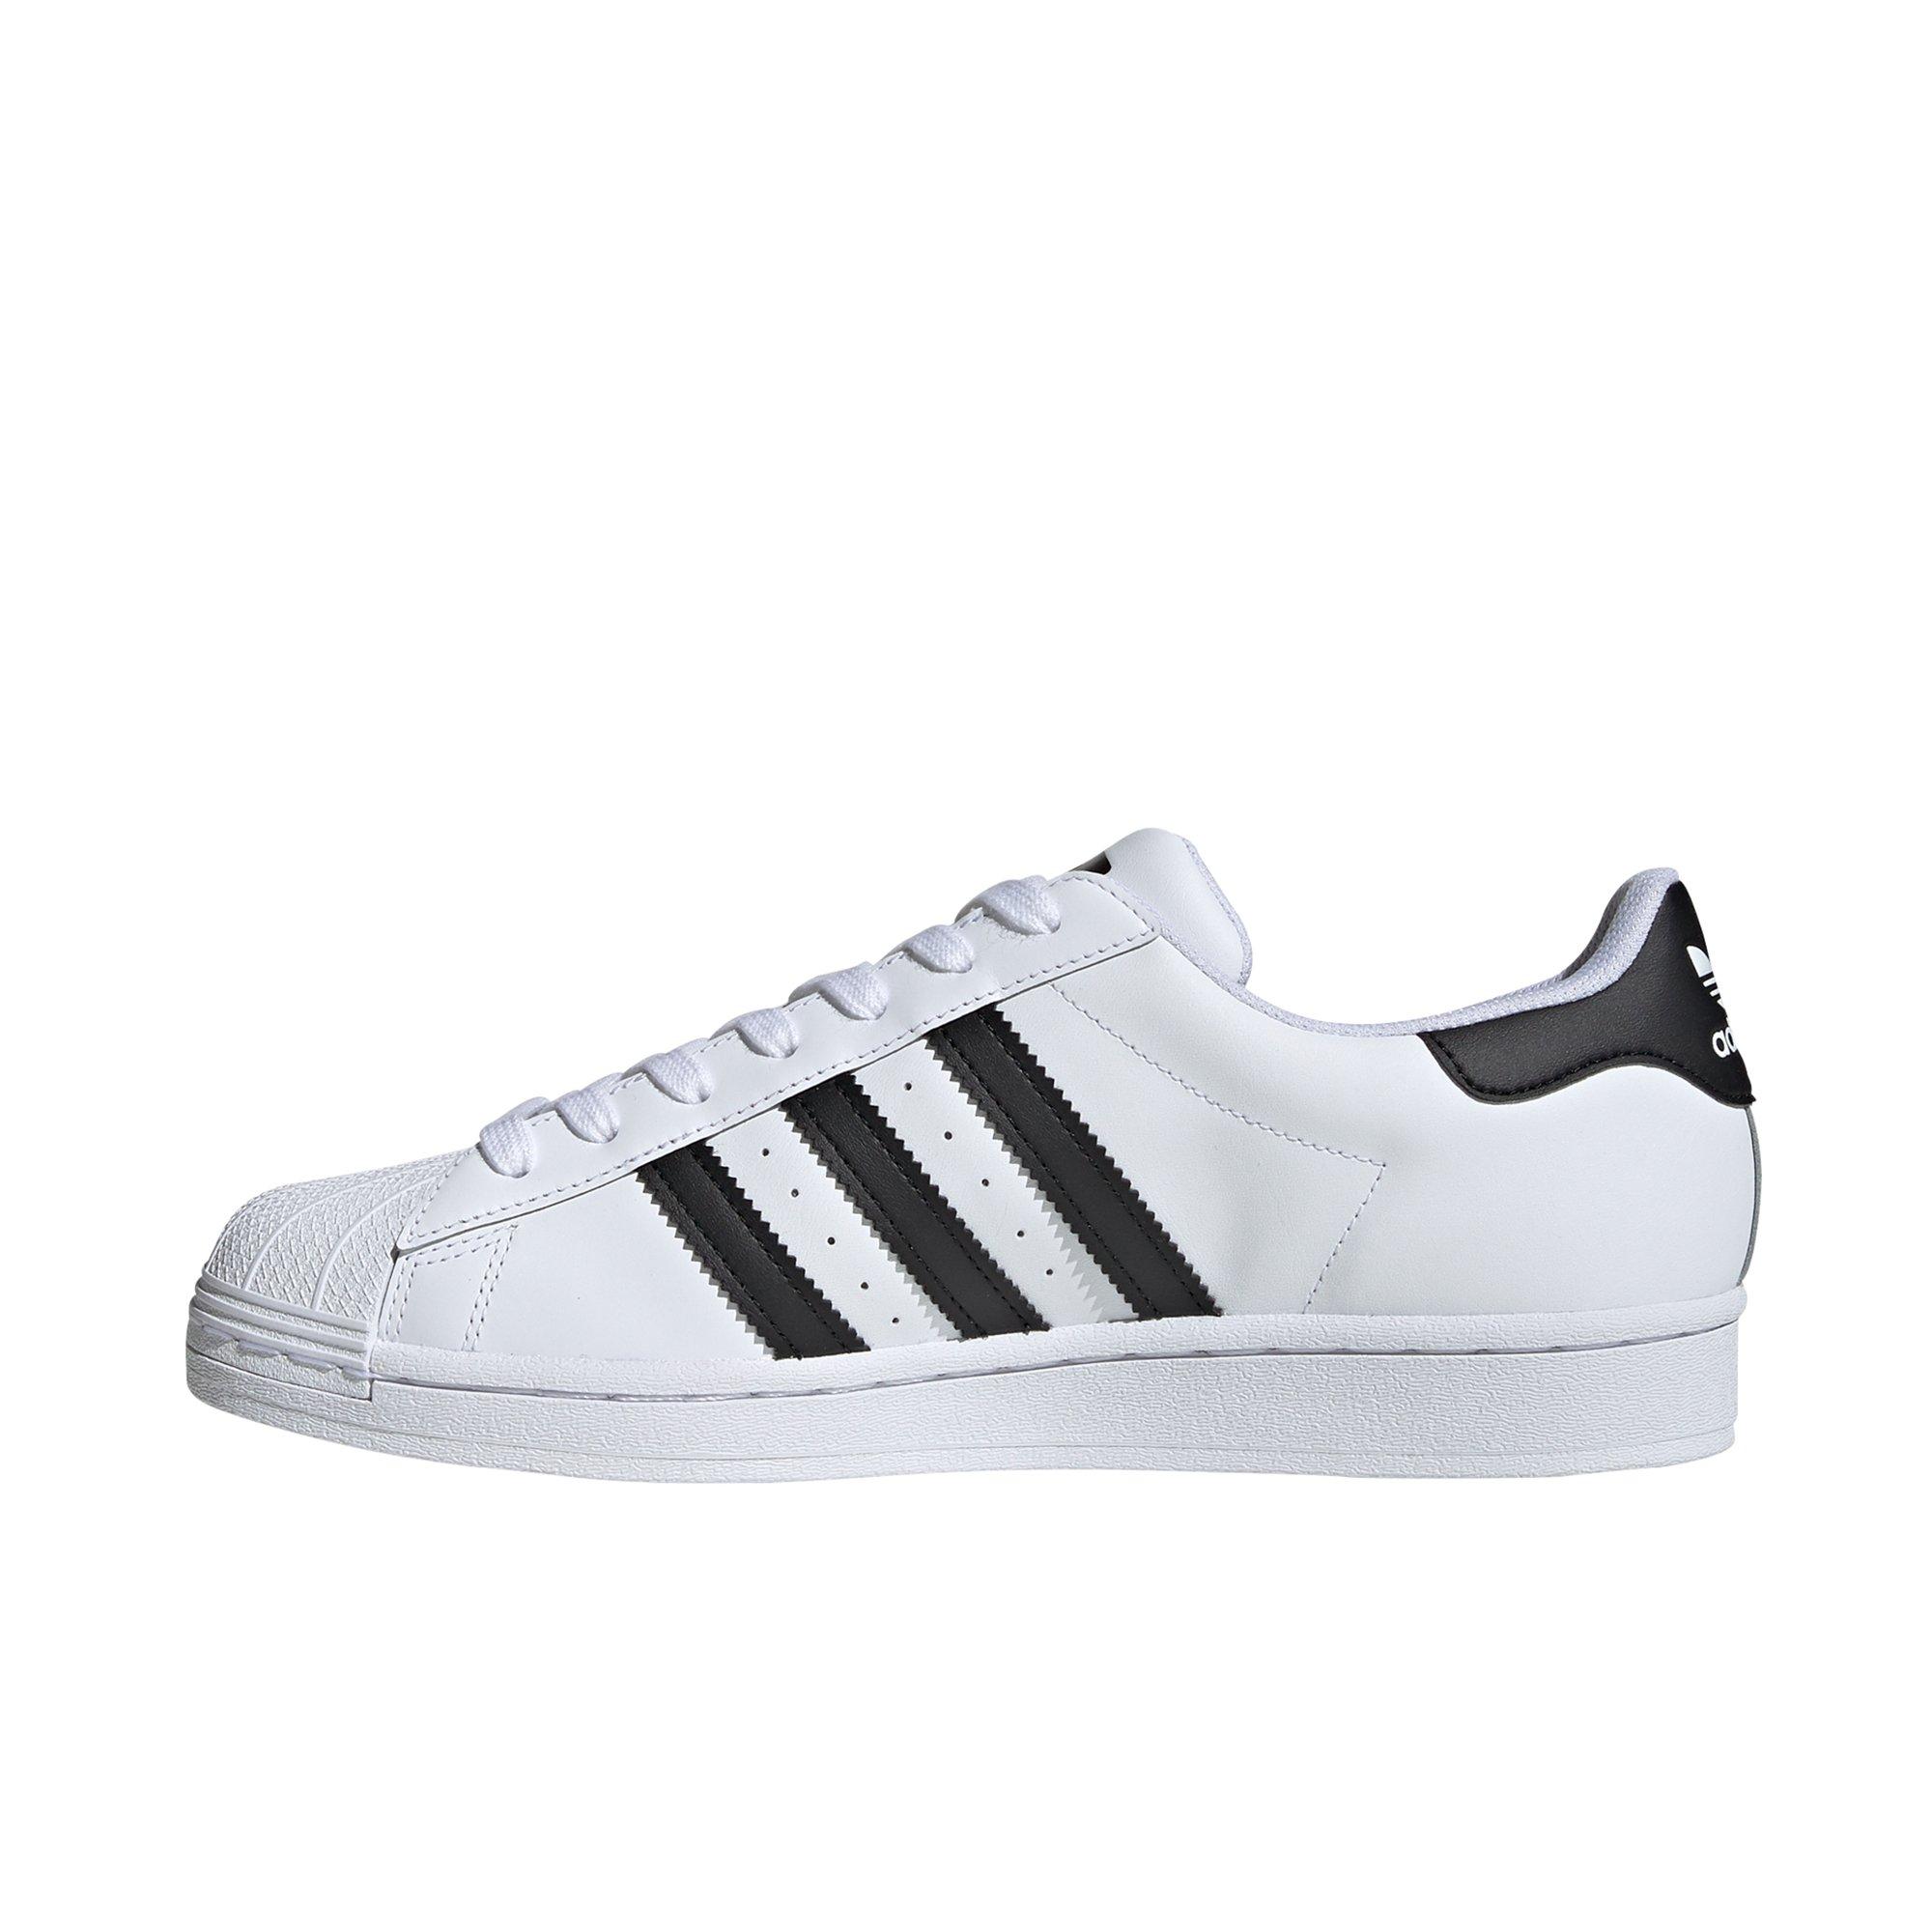 adidas shoes for men clearance